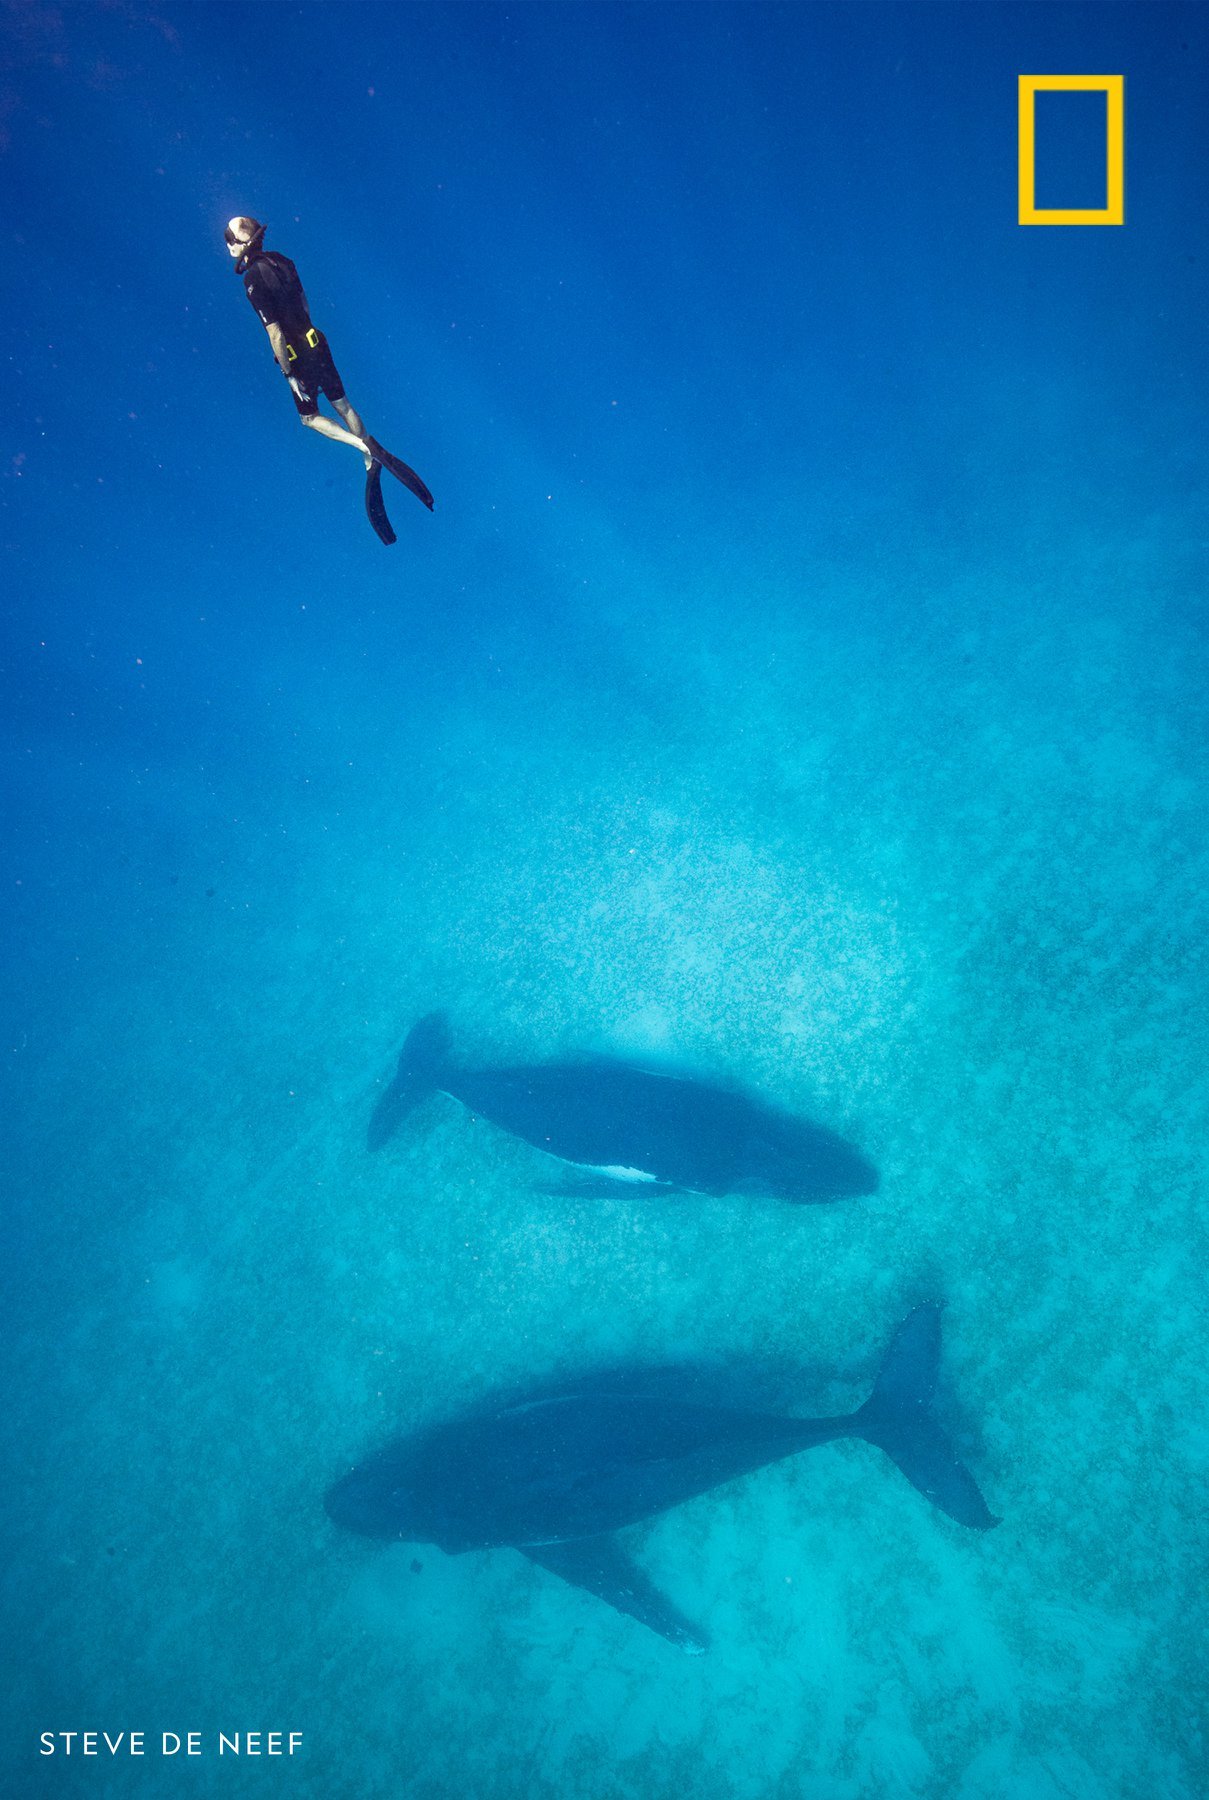 On assignment for NatGeo, Brian Skerry swims with humpback whales in the South Pacific. In our podcast "Overheard" Skerry tells us about the burgeoning study of “whale culture”—and why these super smart cetaceans may have a lot more in common with us than we'd ever imagined. https://on.natgeo.com/overheard